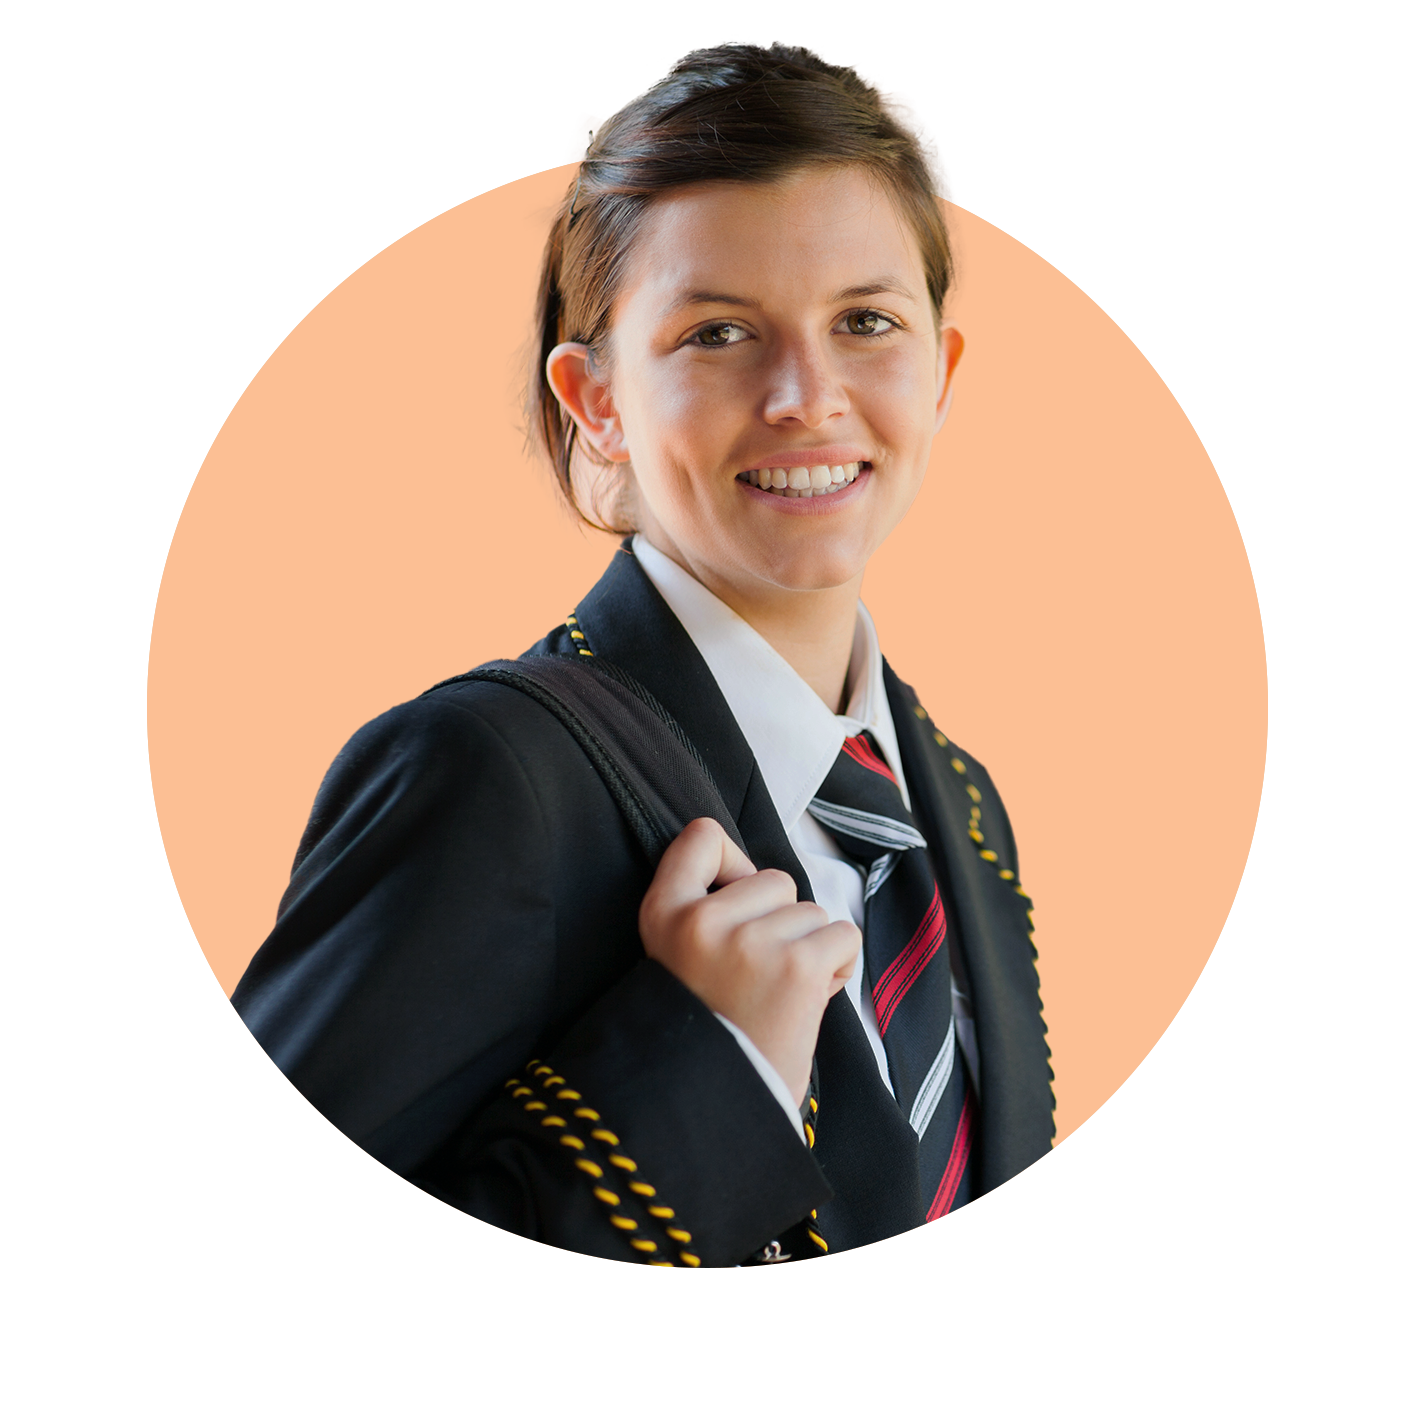 Young teenager in school uniform facing and smiling towards the camera